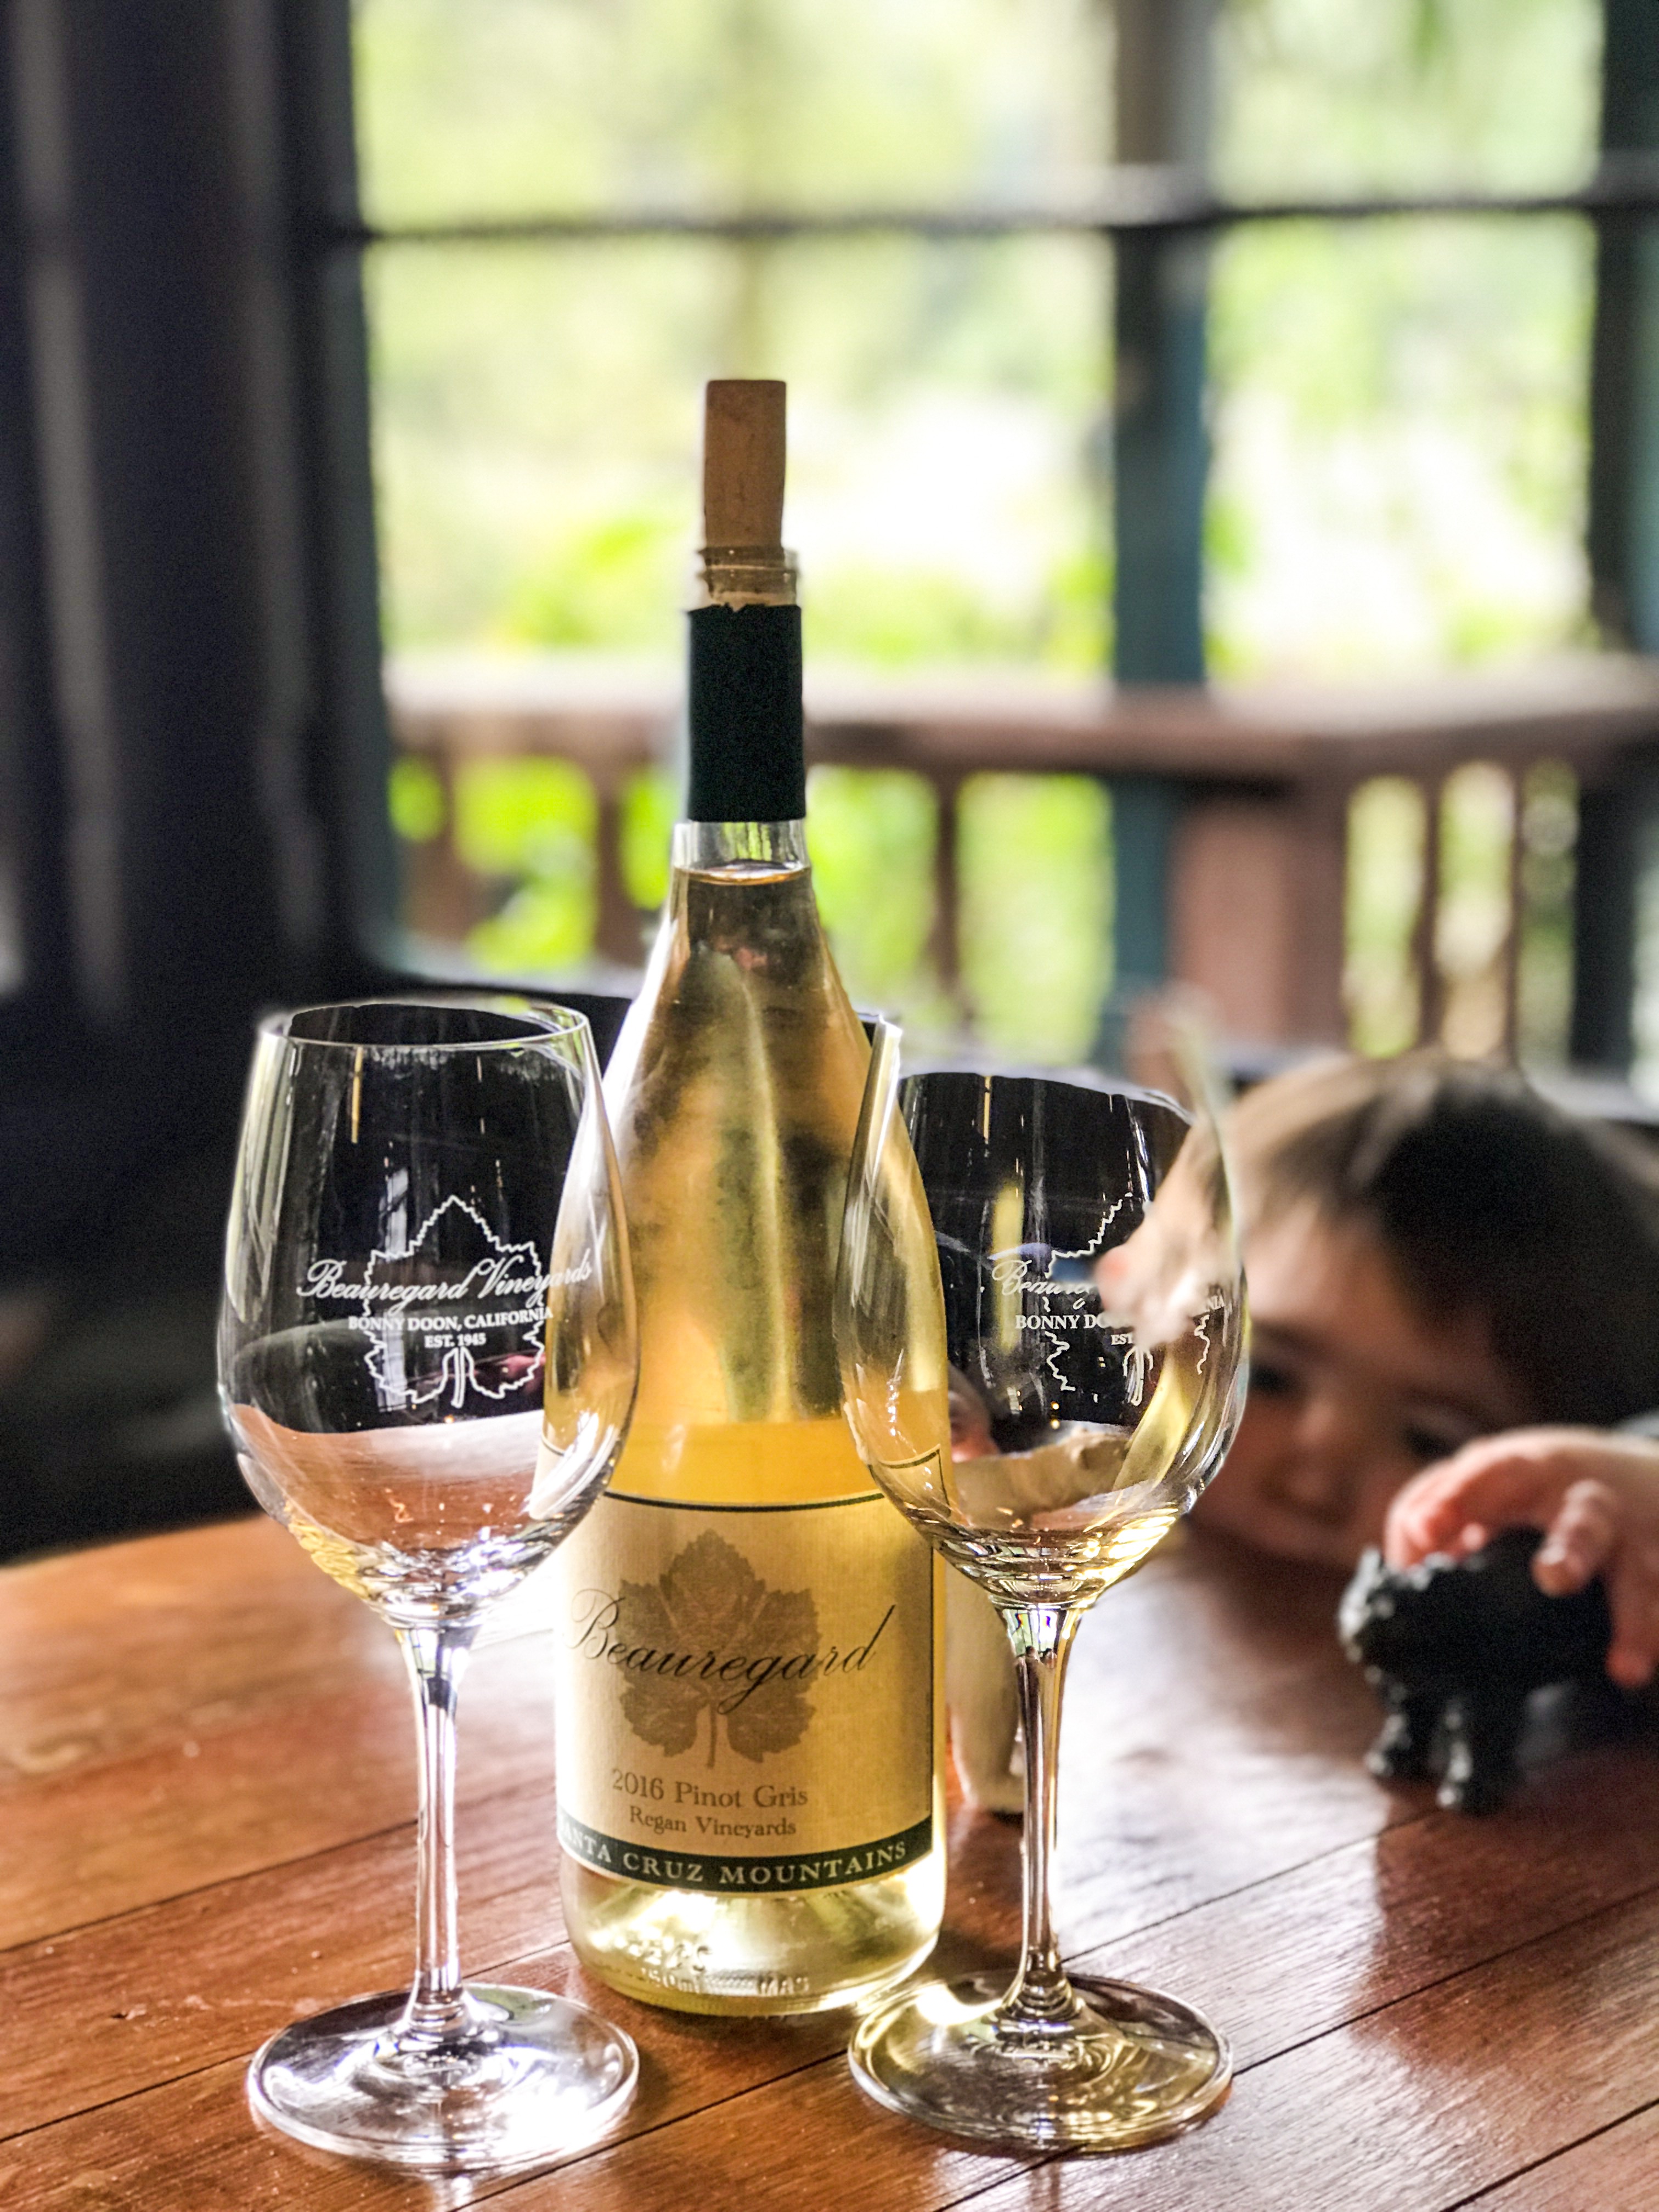 Ultimate List of Kid-Friendly Wineries in Santa Cruz Mountains | San Francisco with Kids | Family Friendly Wineries | Henry and Andrew’s Guide (www.henryandandrewsguide.com)